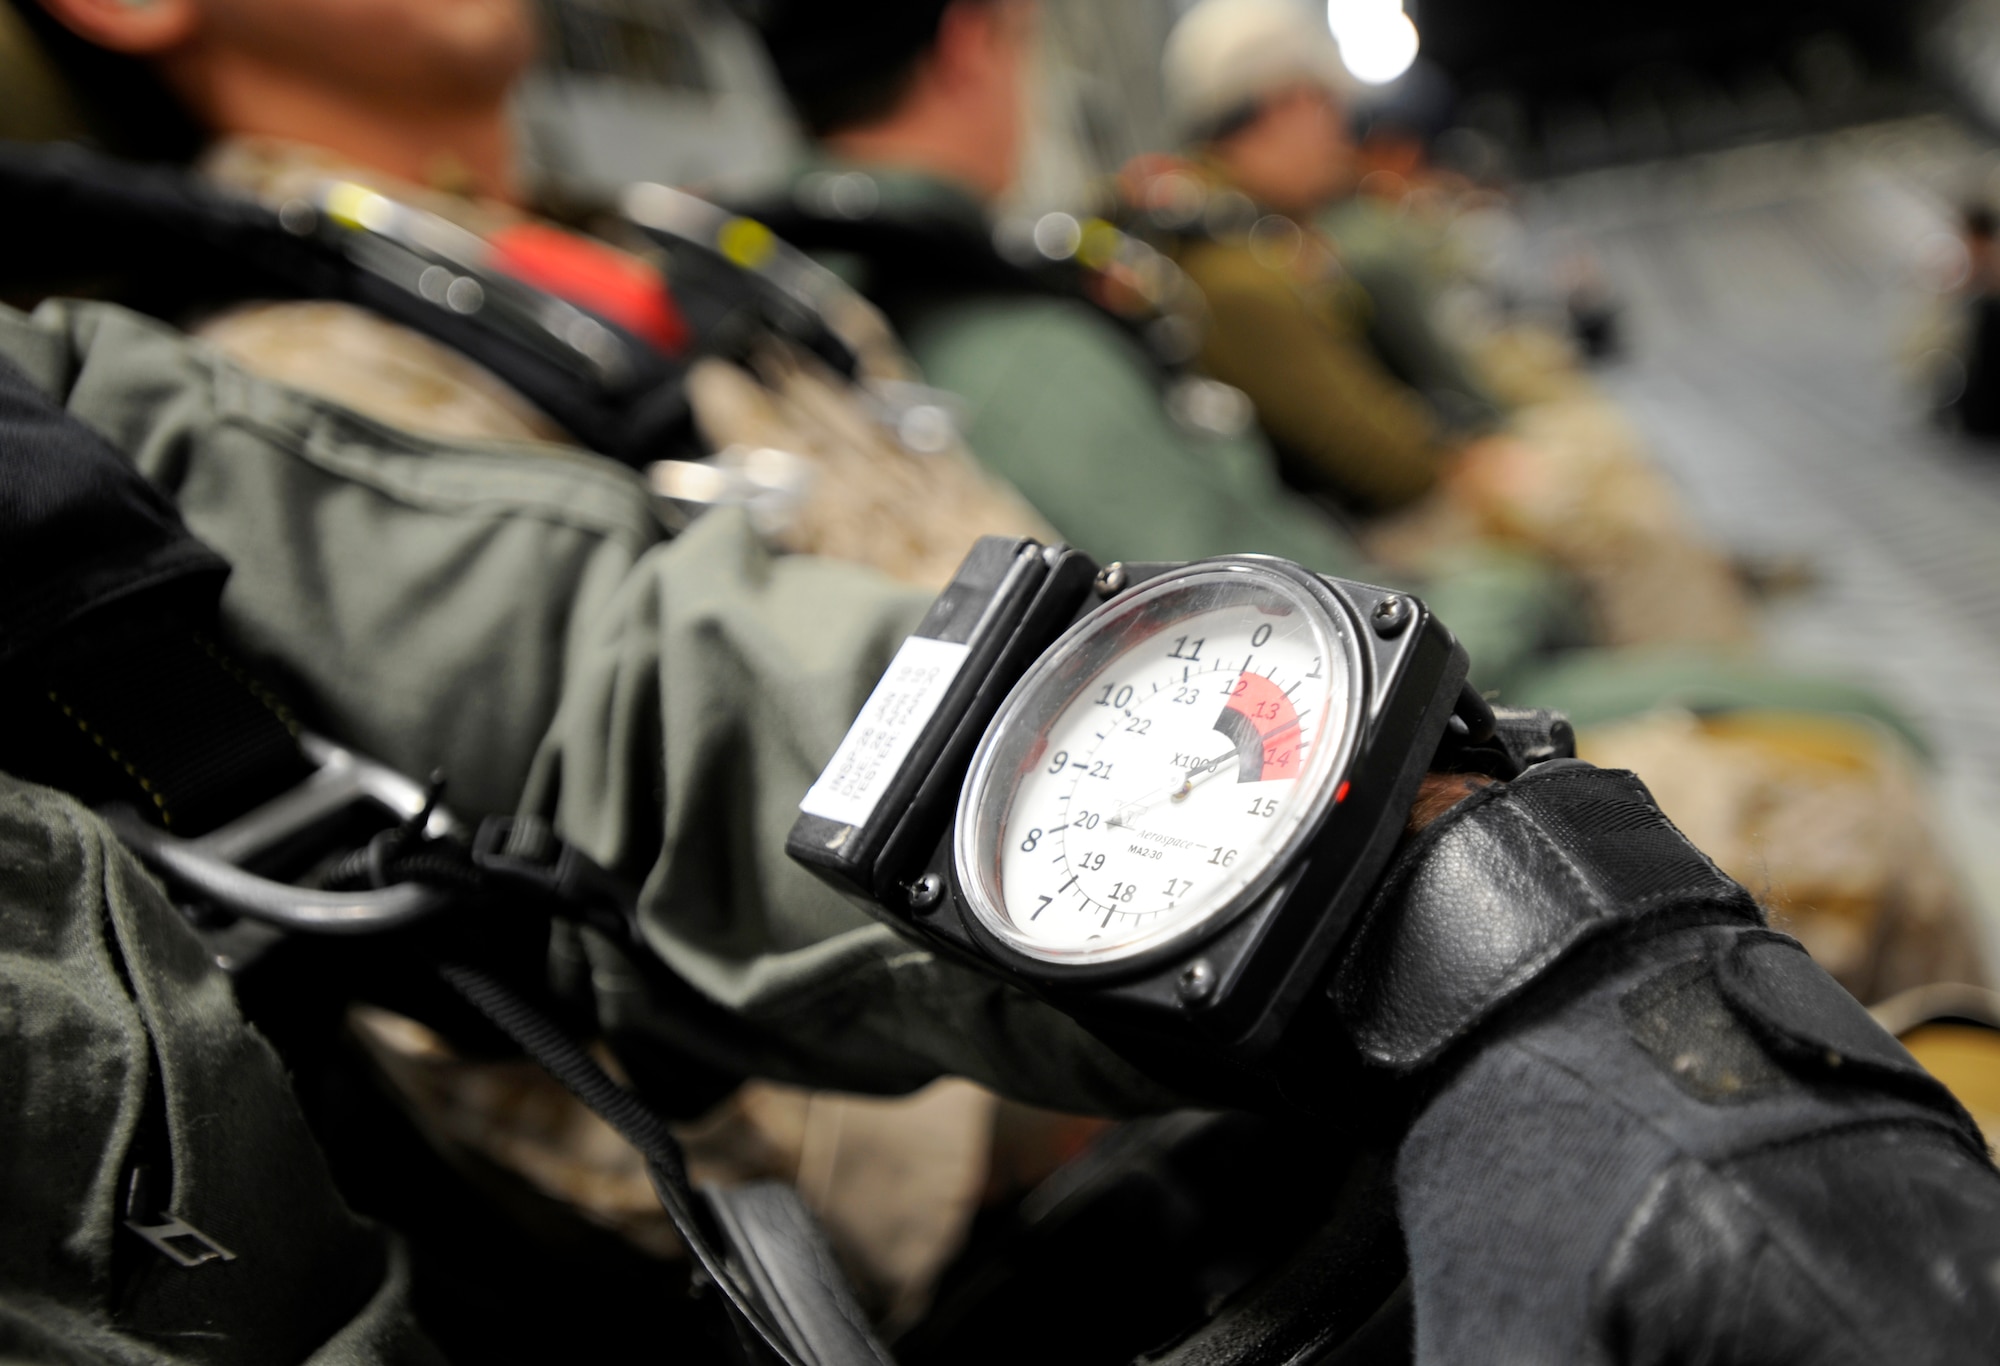 A Navy SEAL checks his altimeter before jumping from a C-17 Globemaster III over Fort Picket Maneuver Training Center, Va., April 15.  The jump was part of joint training exercise with the 517th Airlift Squadron from Elmendorf Air Force Base, Alaska. The training consisted of high altitude, high opening and high altitude, low opening jumps between 5,000 and 12,500 feet. (Air Force photo by Staff Sgt. Brian Ferguson)